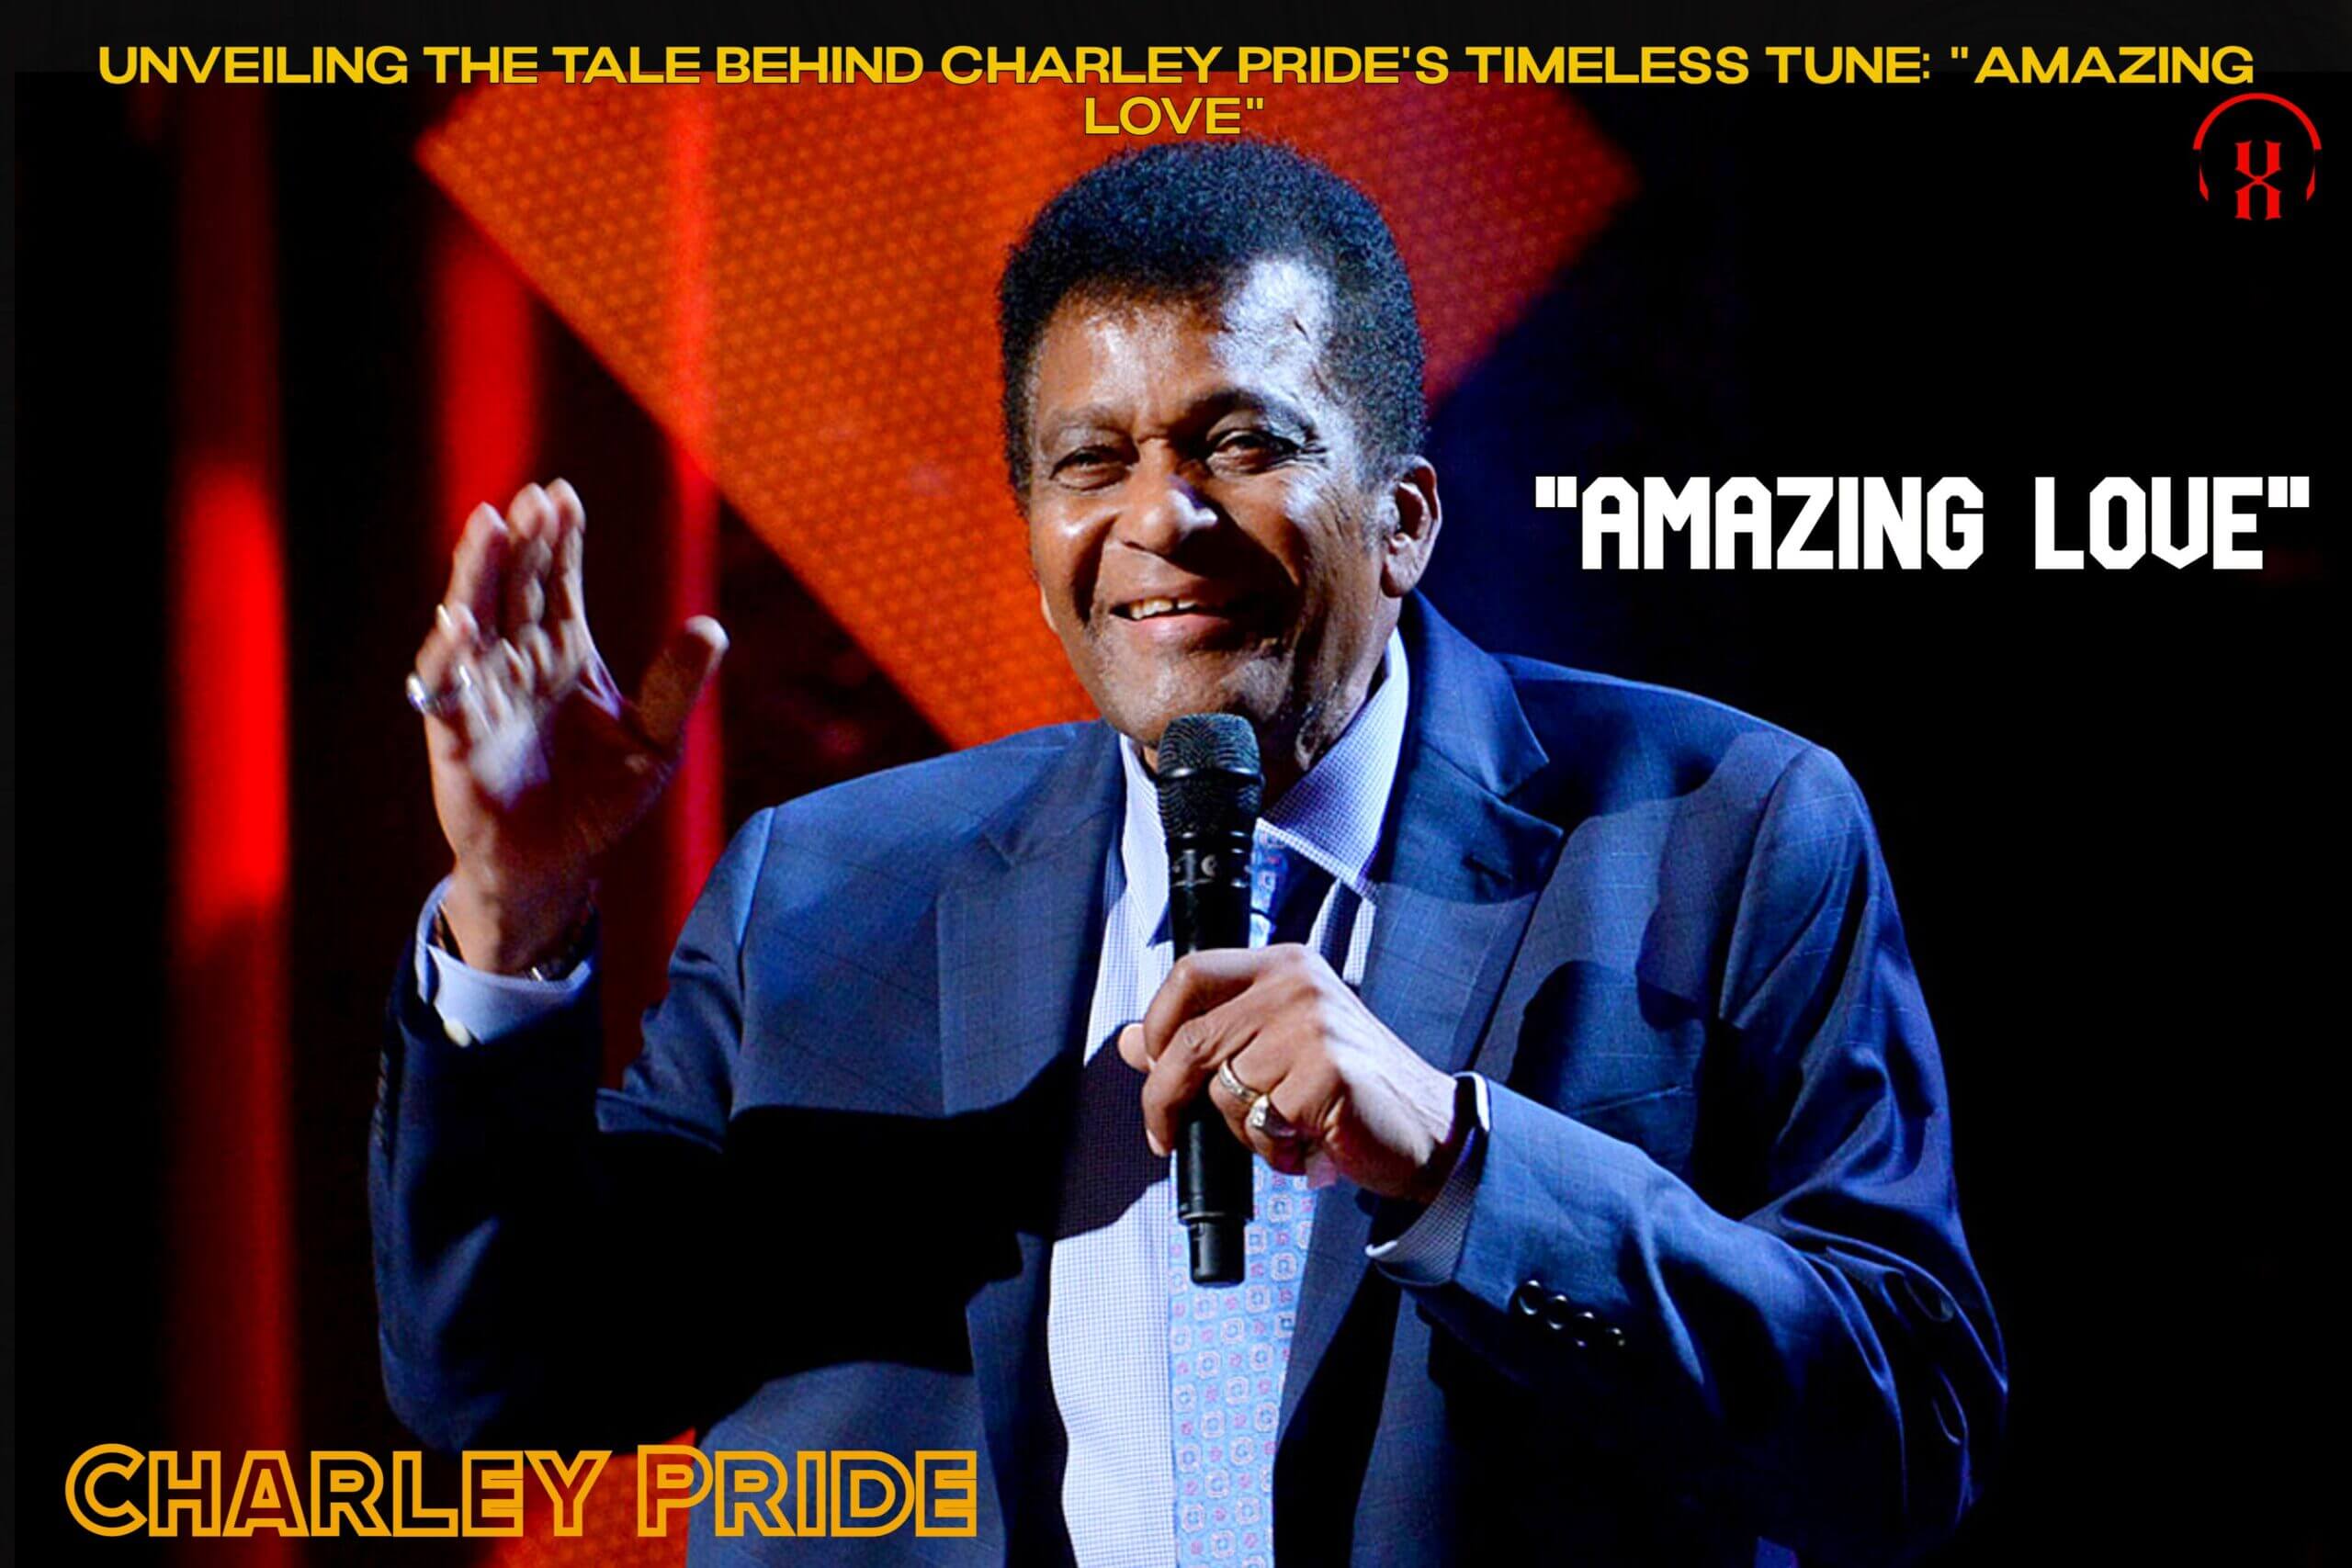 Charley Pride's Timeless Tune: "Amazing Love"